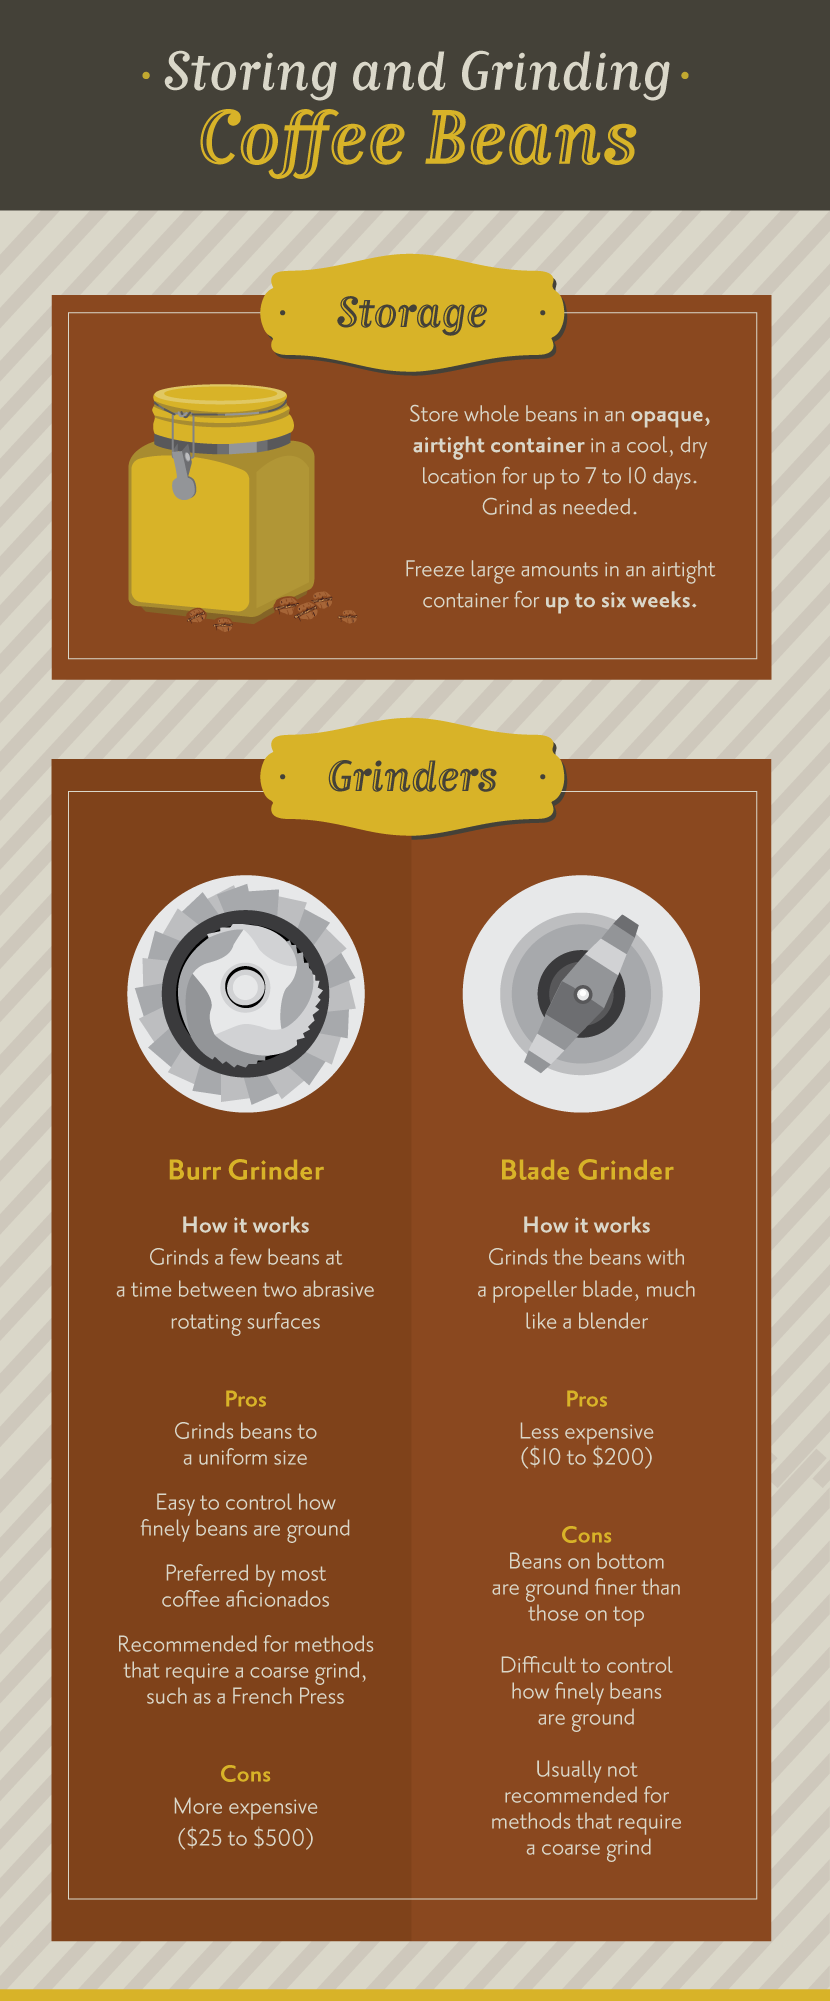 Storing and Grinding Coffee Beans - Four Ways to Brew a Perfect Cup of Coffee